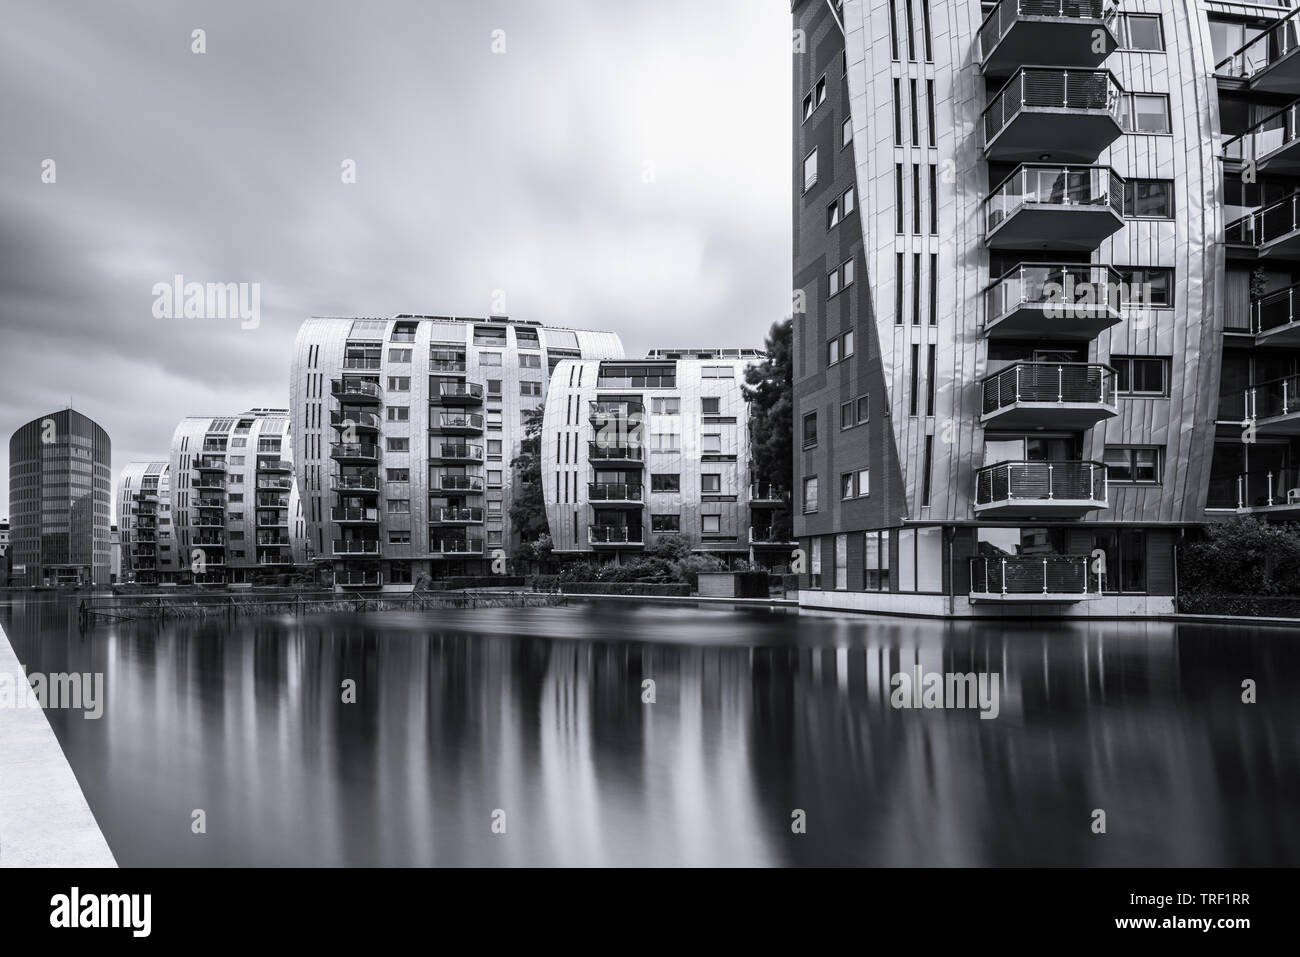 Black and white long exposure of modern apartment flats in Den Bosch, Noord-Brabant, Netherlands Stock Photo